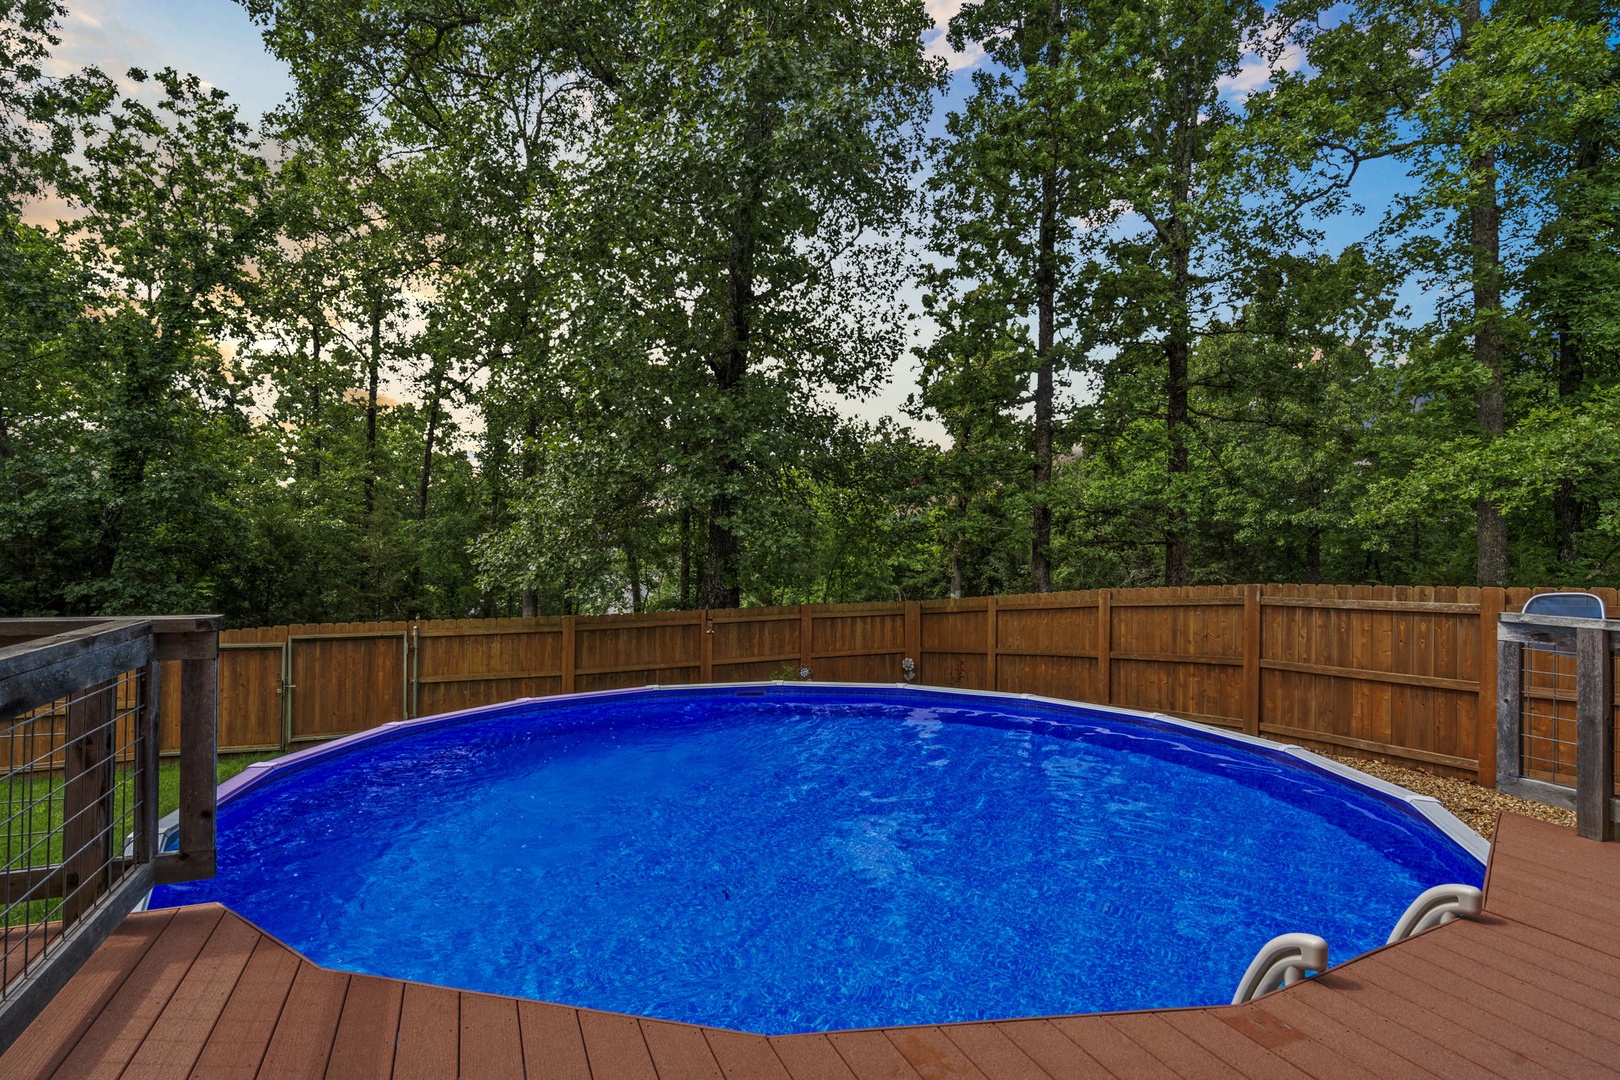 Take a dip in the private pool